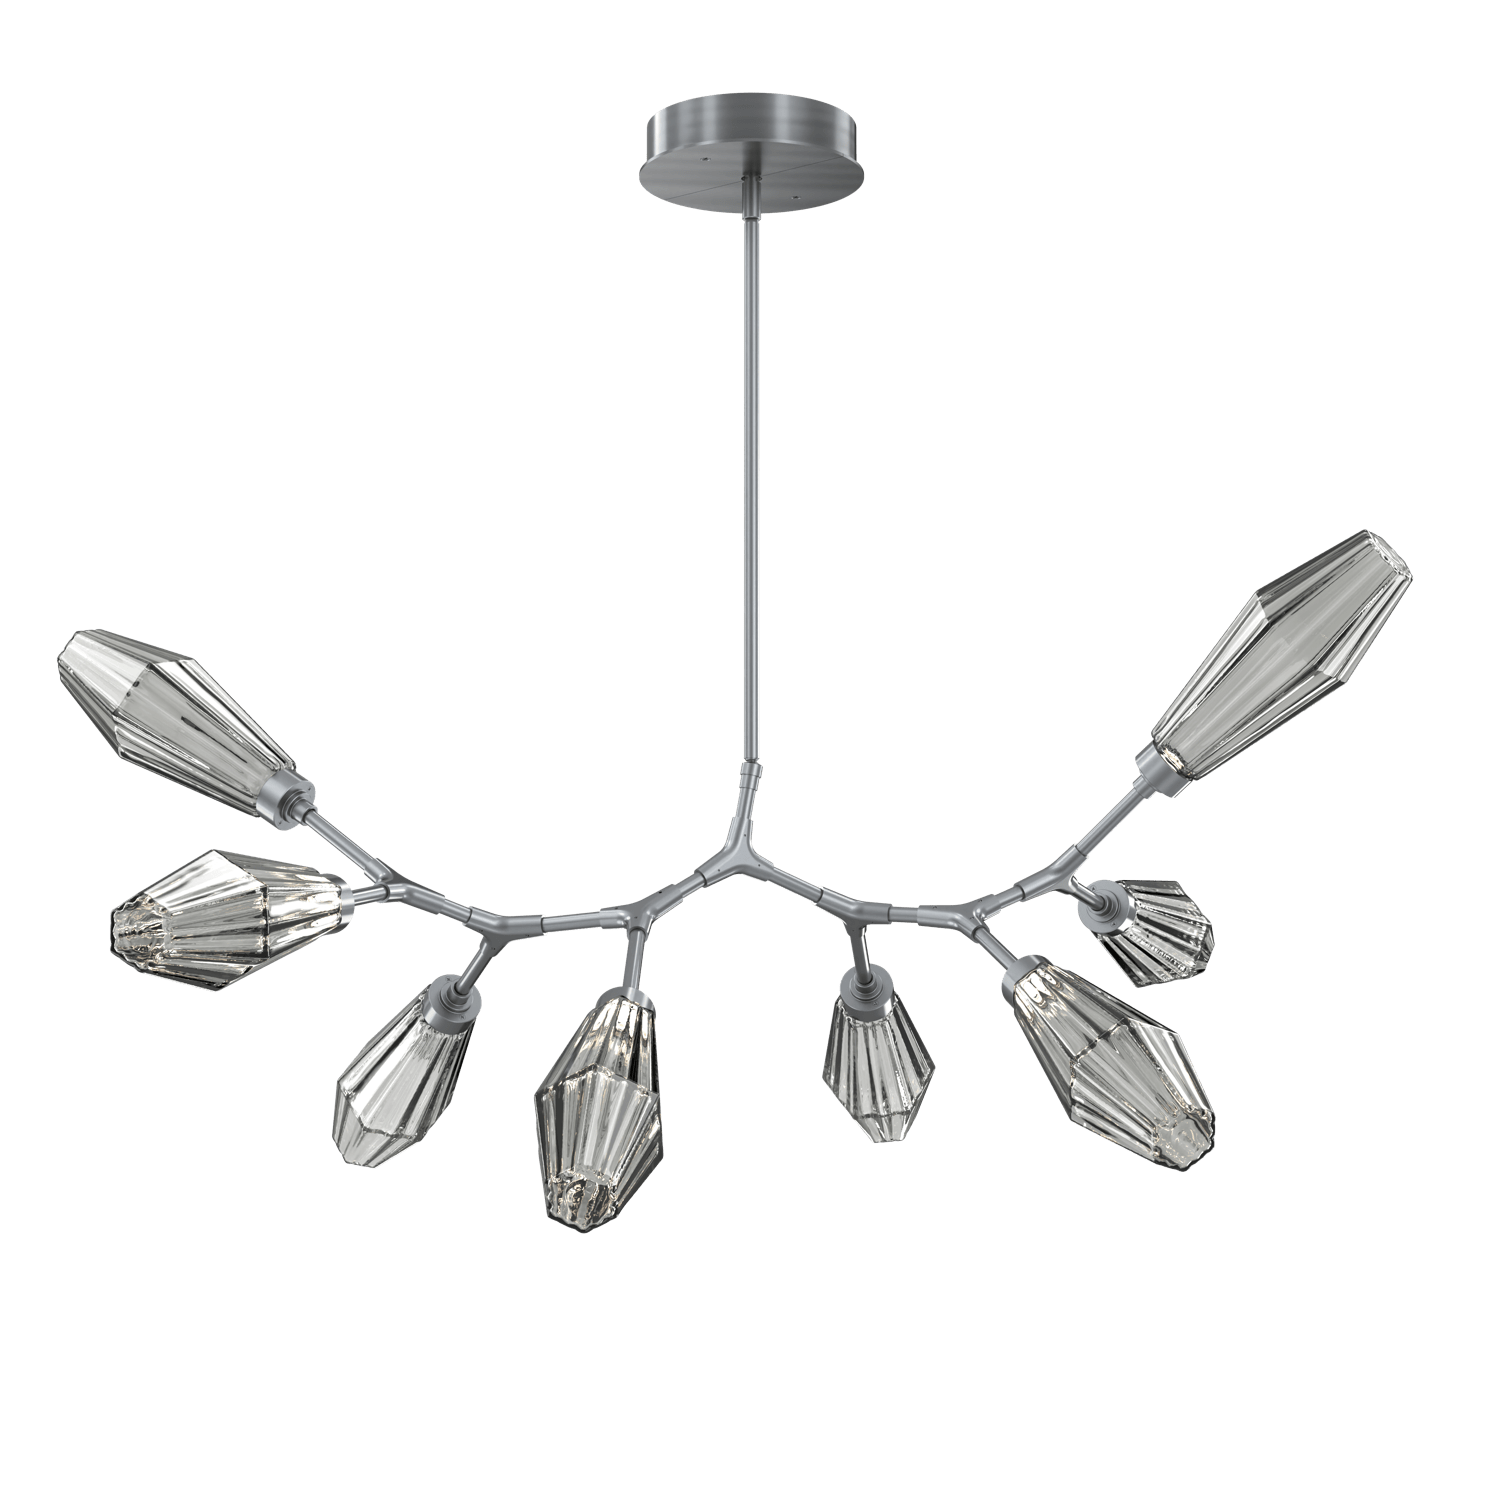 PLB0049-BB-GM-RS-Hammerton-Studio-Aalto-8-light-modern-branch-chandelier-with-gunmetal-finish-and-optic-ribbed-smoke-glass-shades-and-LED-lamping